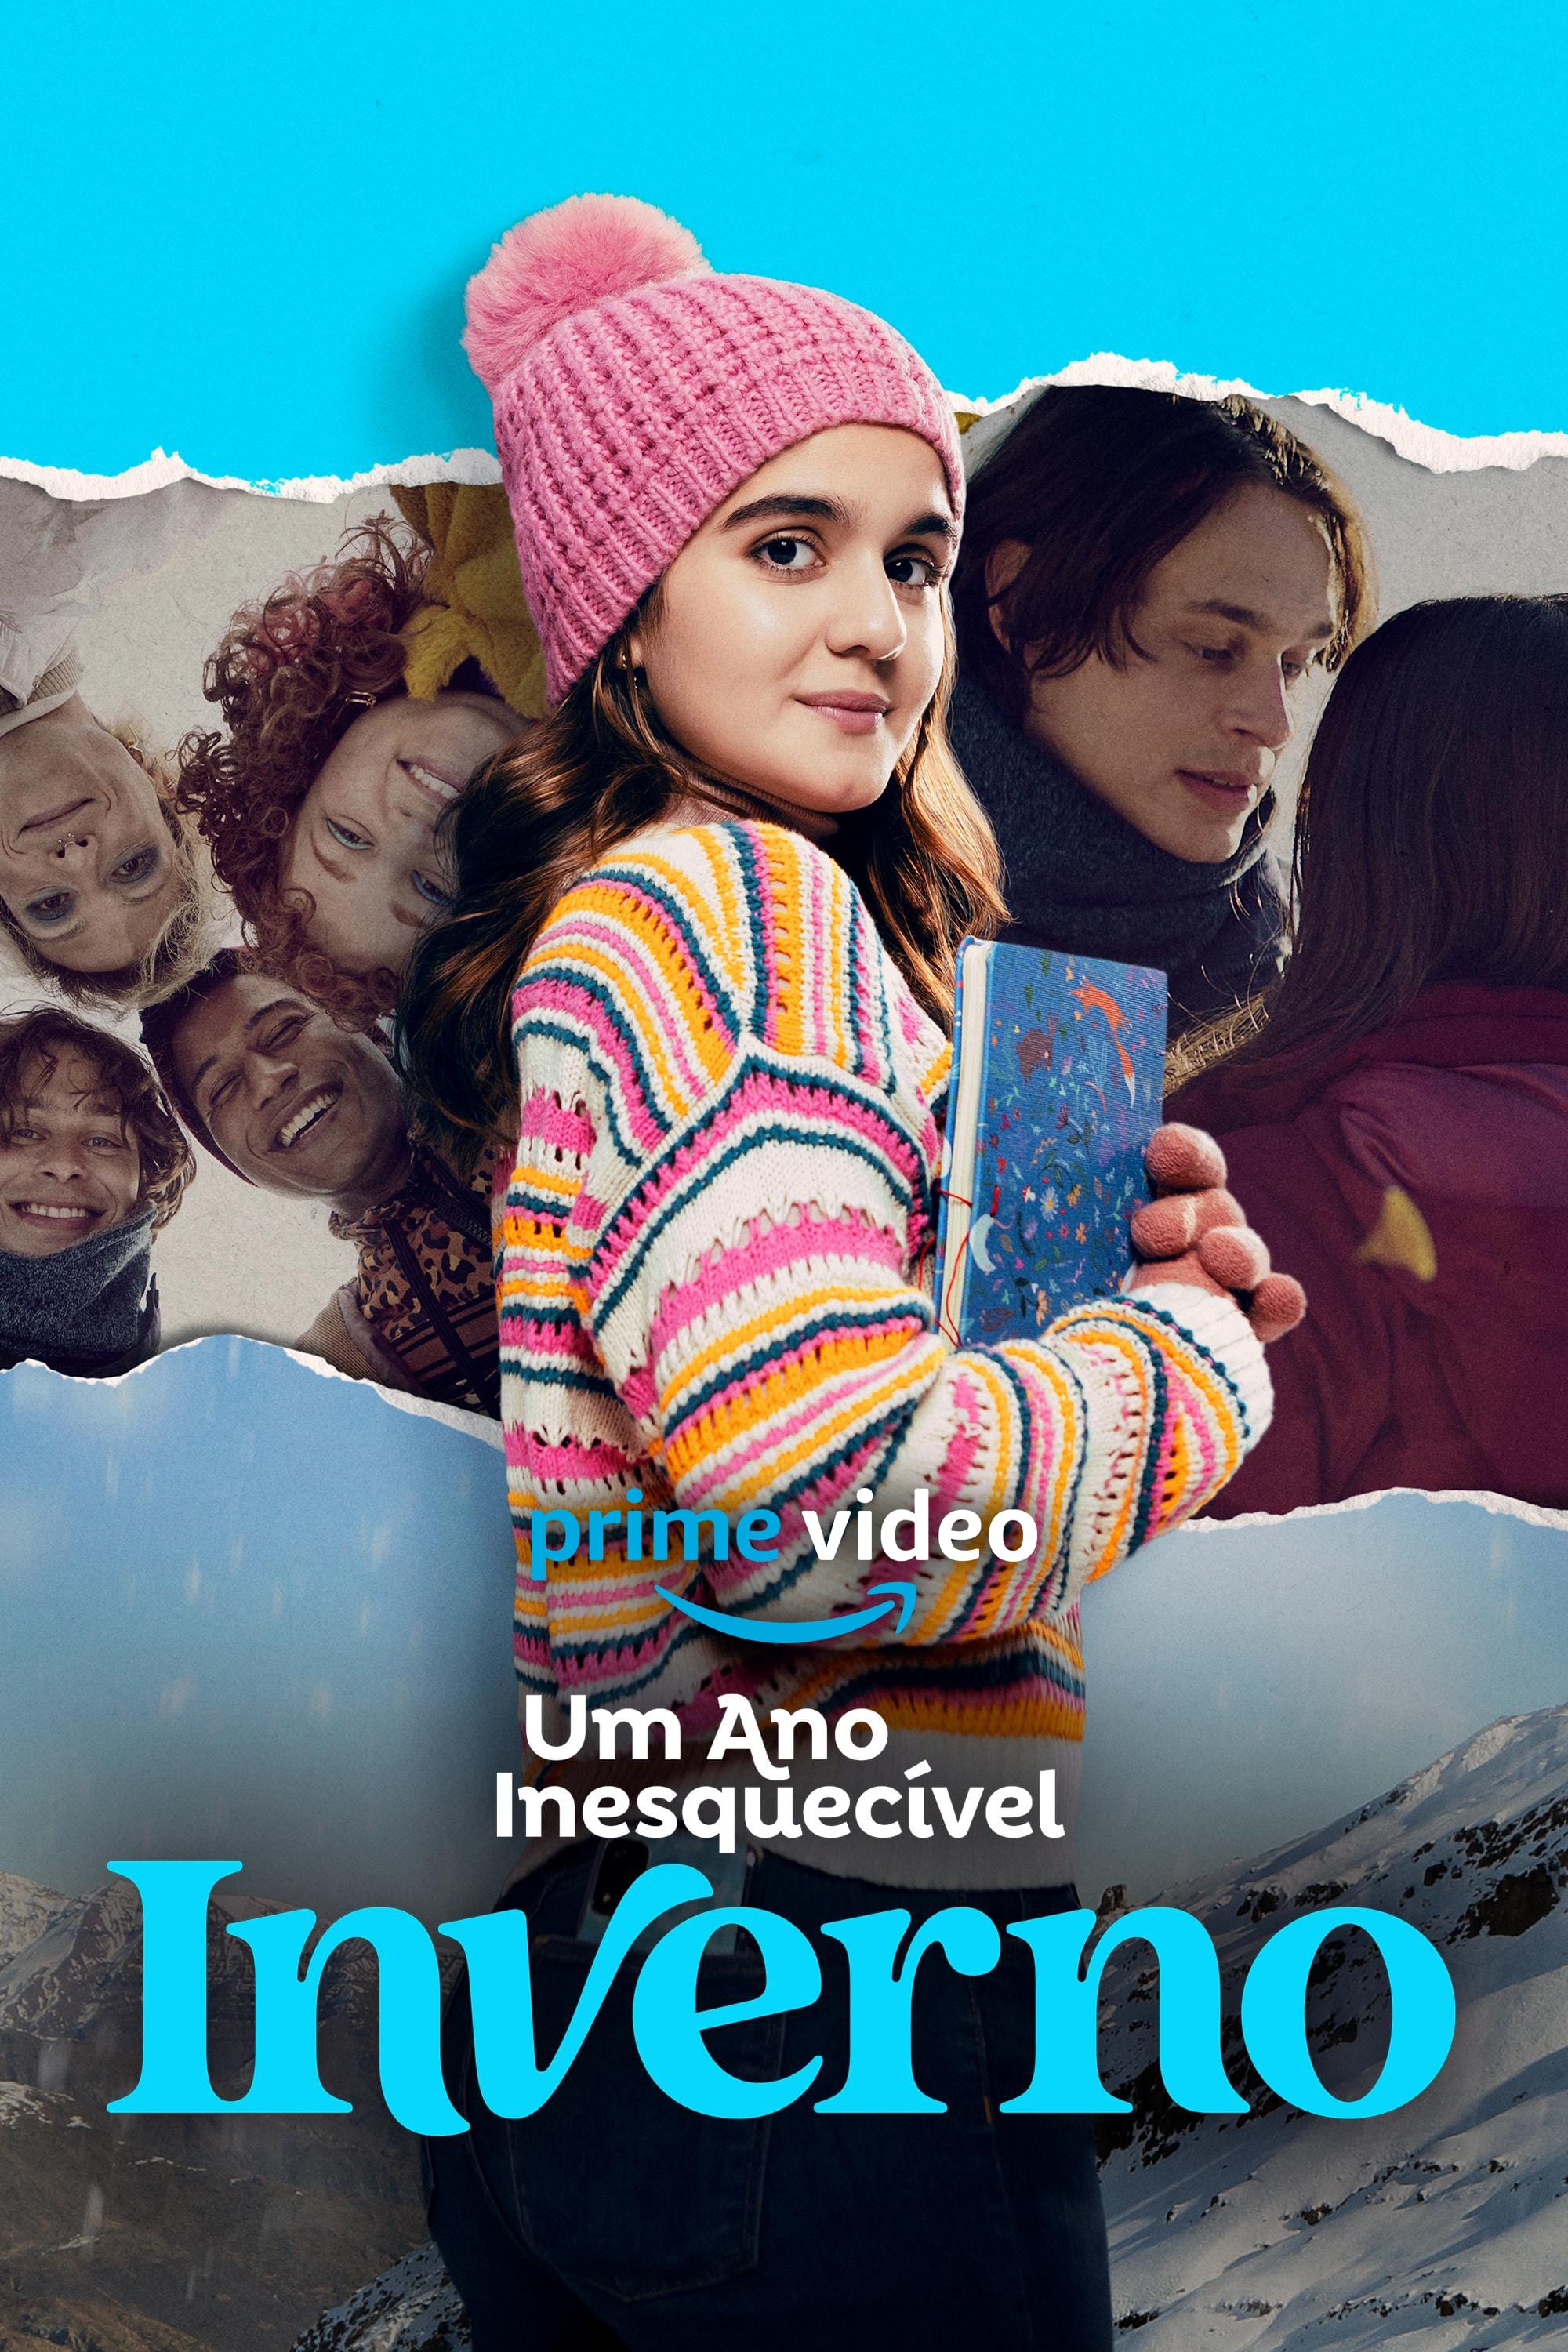 Instead of joining the graduation trip with her friends, Mabel is forced to travel with her parents to a ski station in Chile. Only she didn't expect this freezing retreat could introduce her to a secret group of friends and a potential new love.